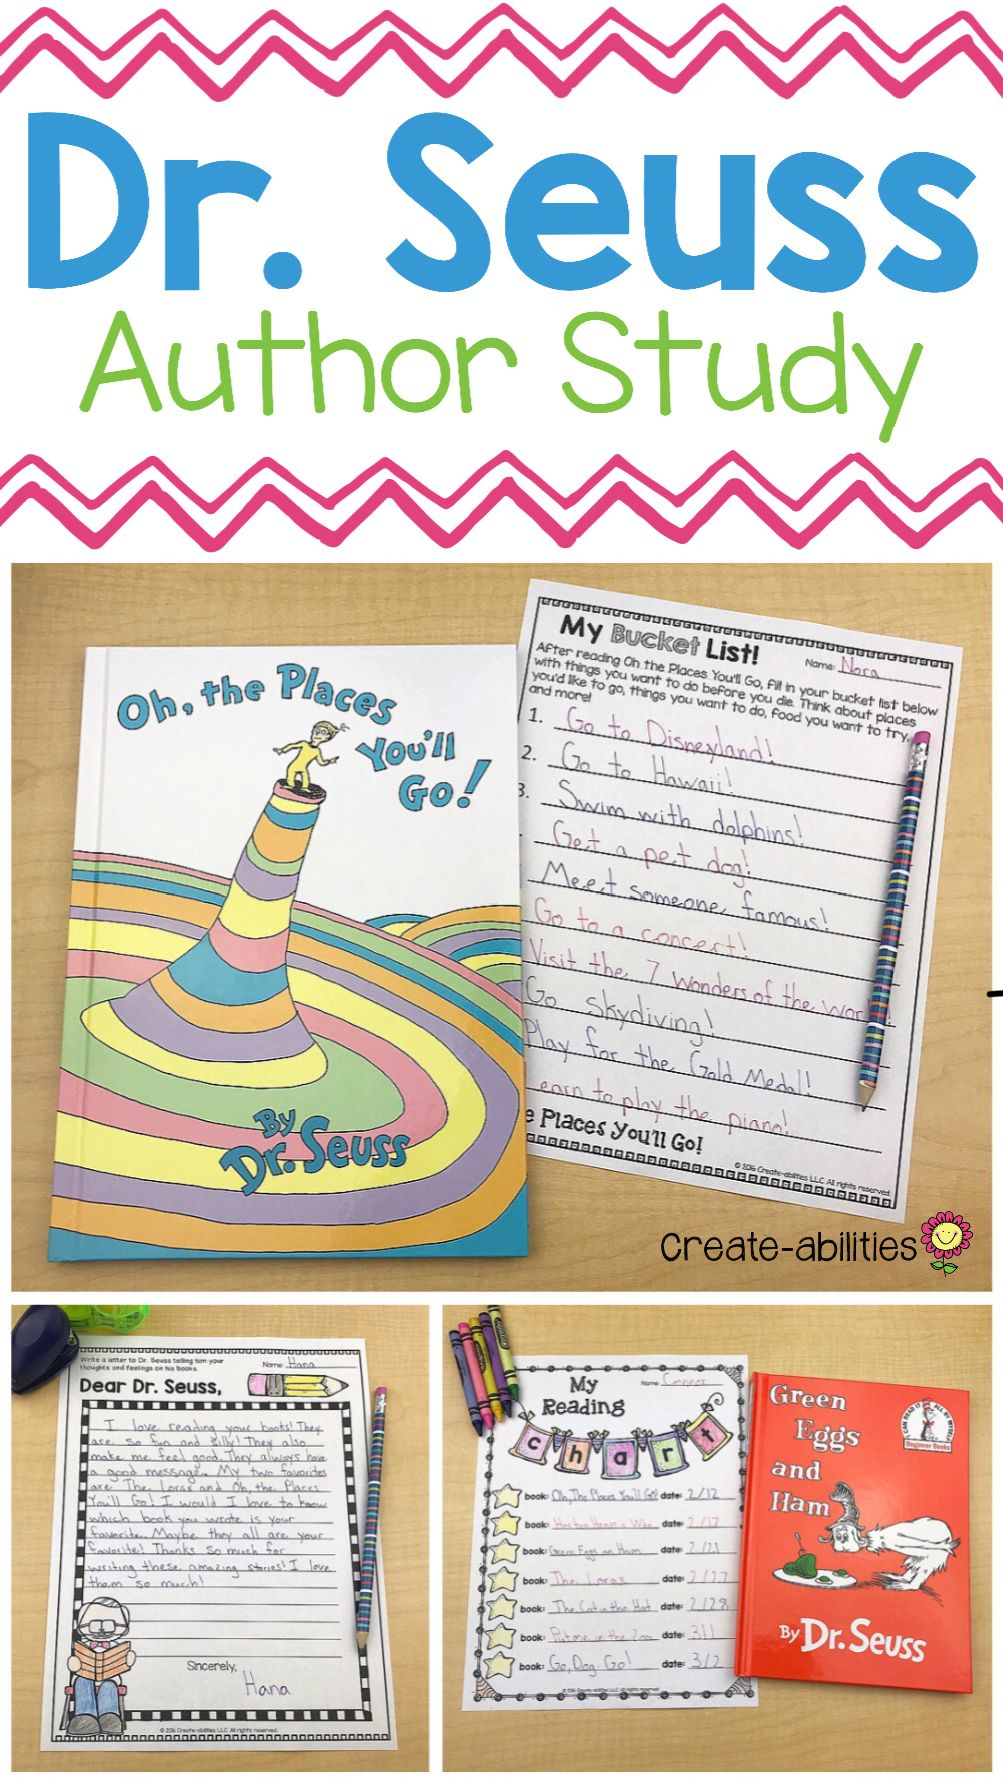 Dr. Seuss Author Study - Use This 47 Page Resource With Your